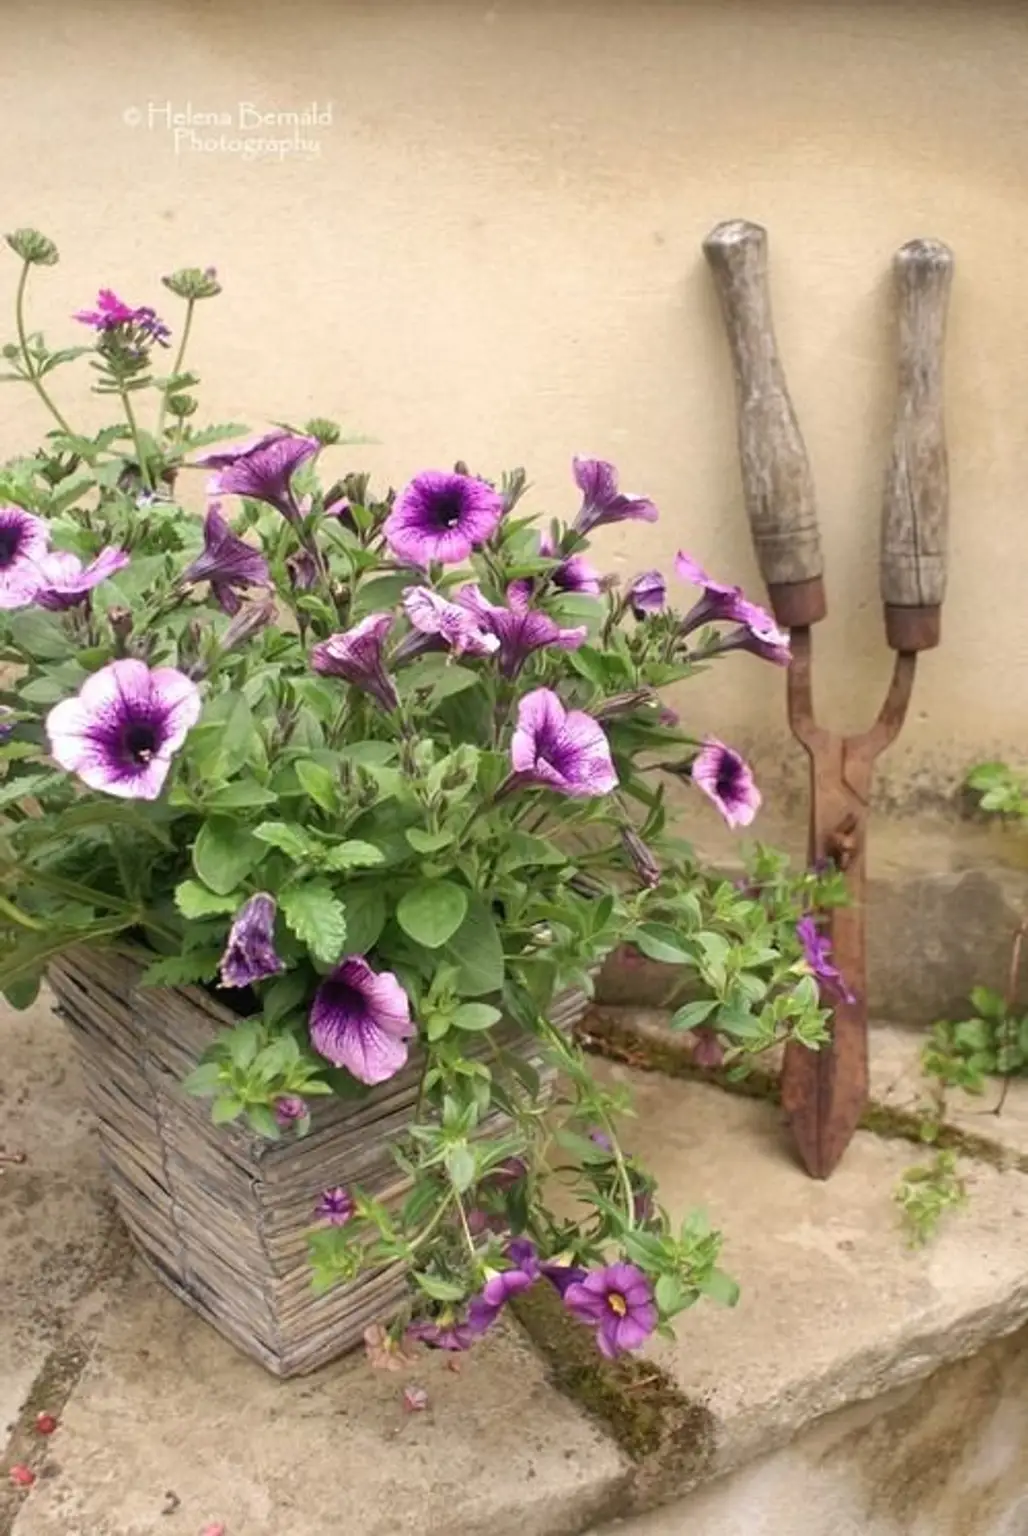 Petunias in All Shades of the Rainbow